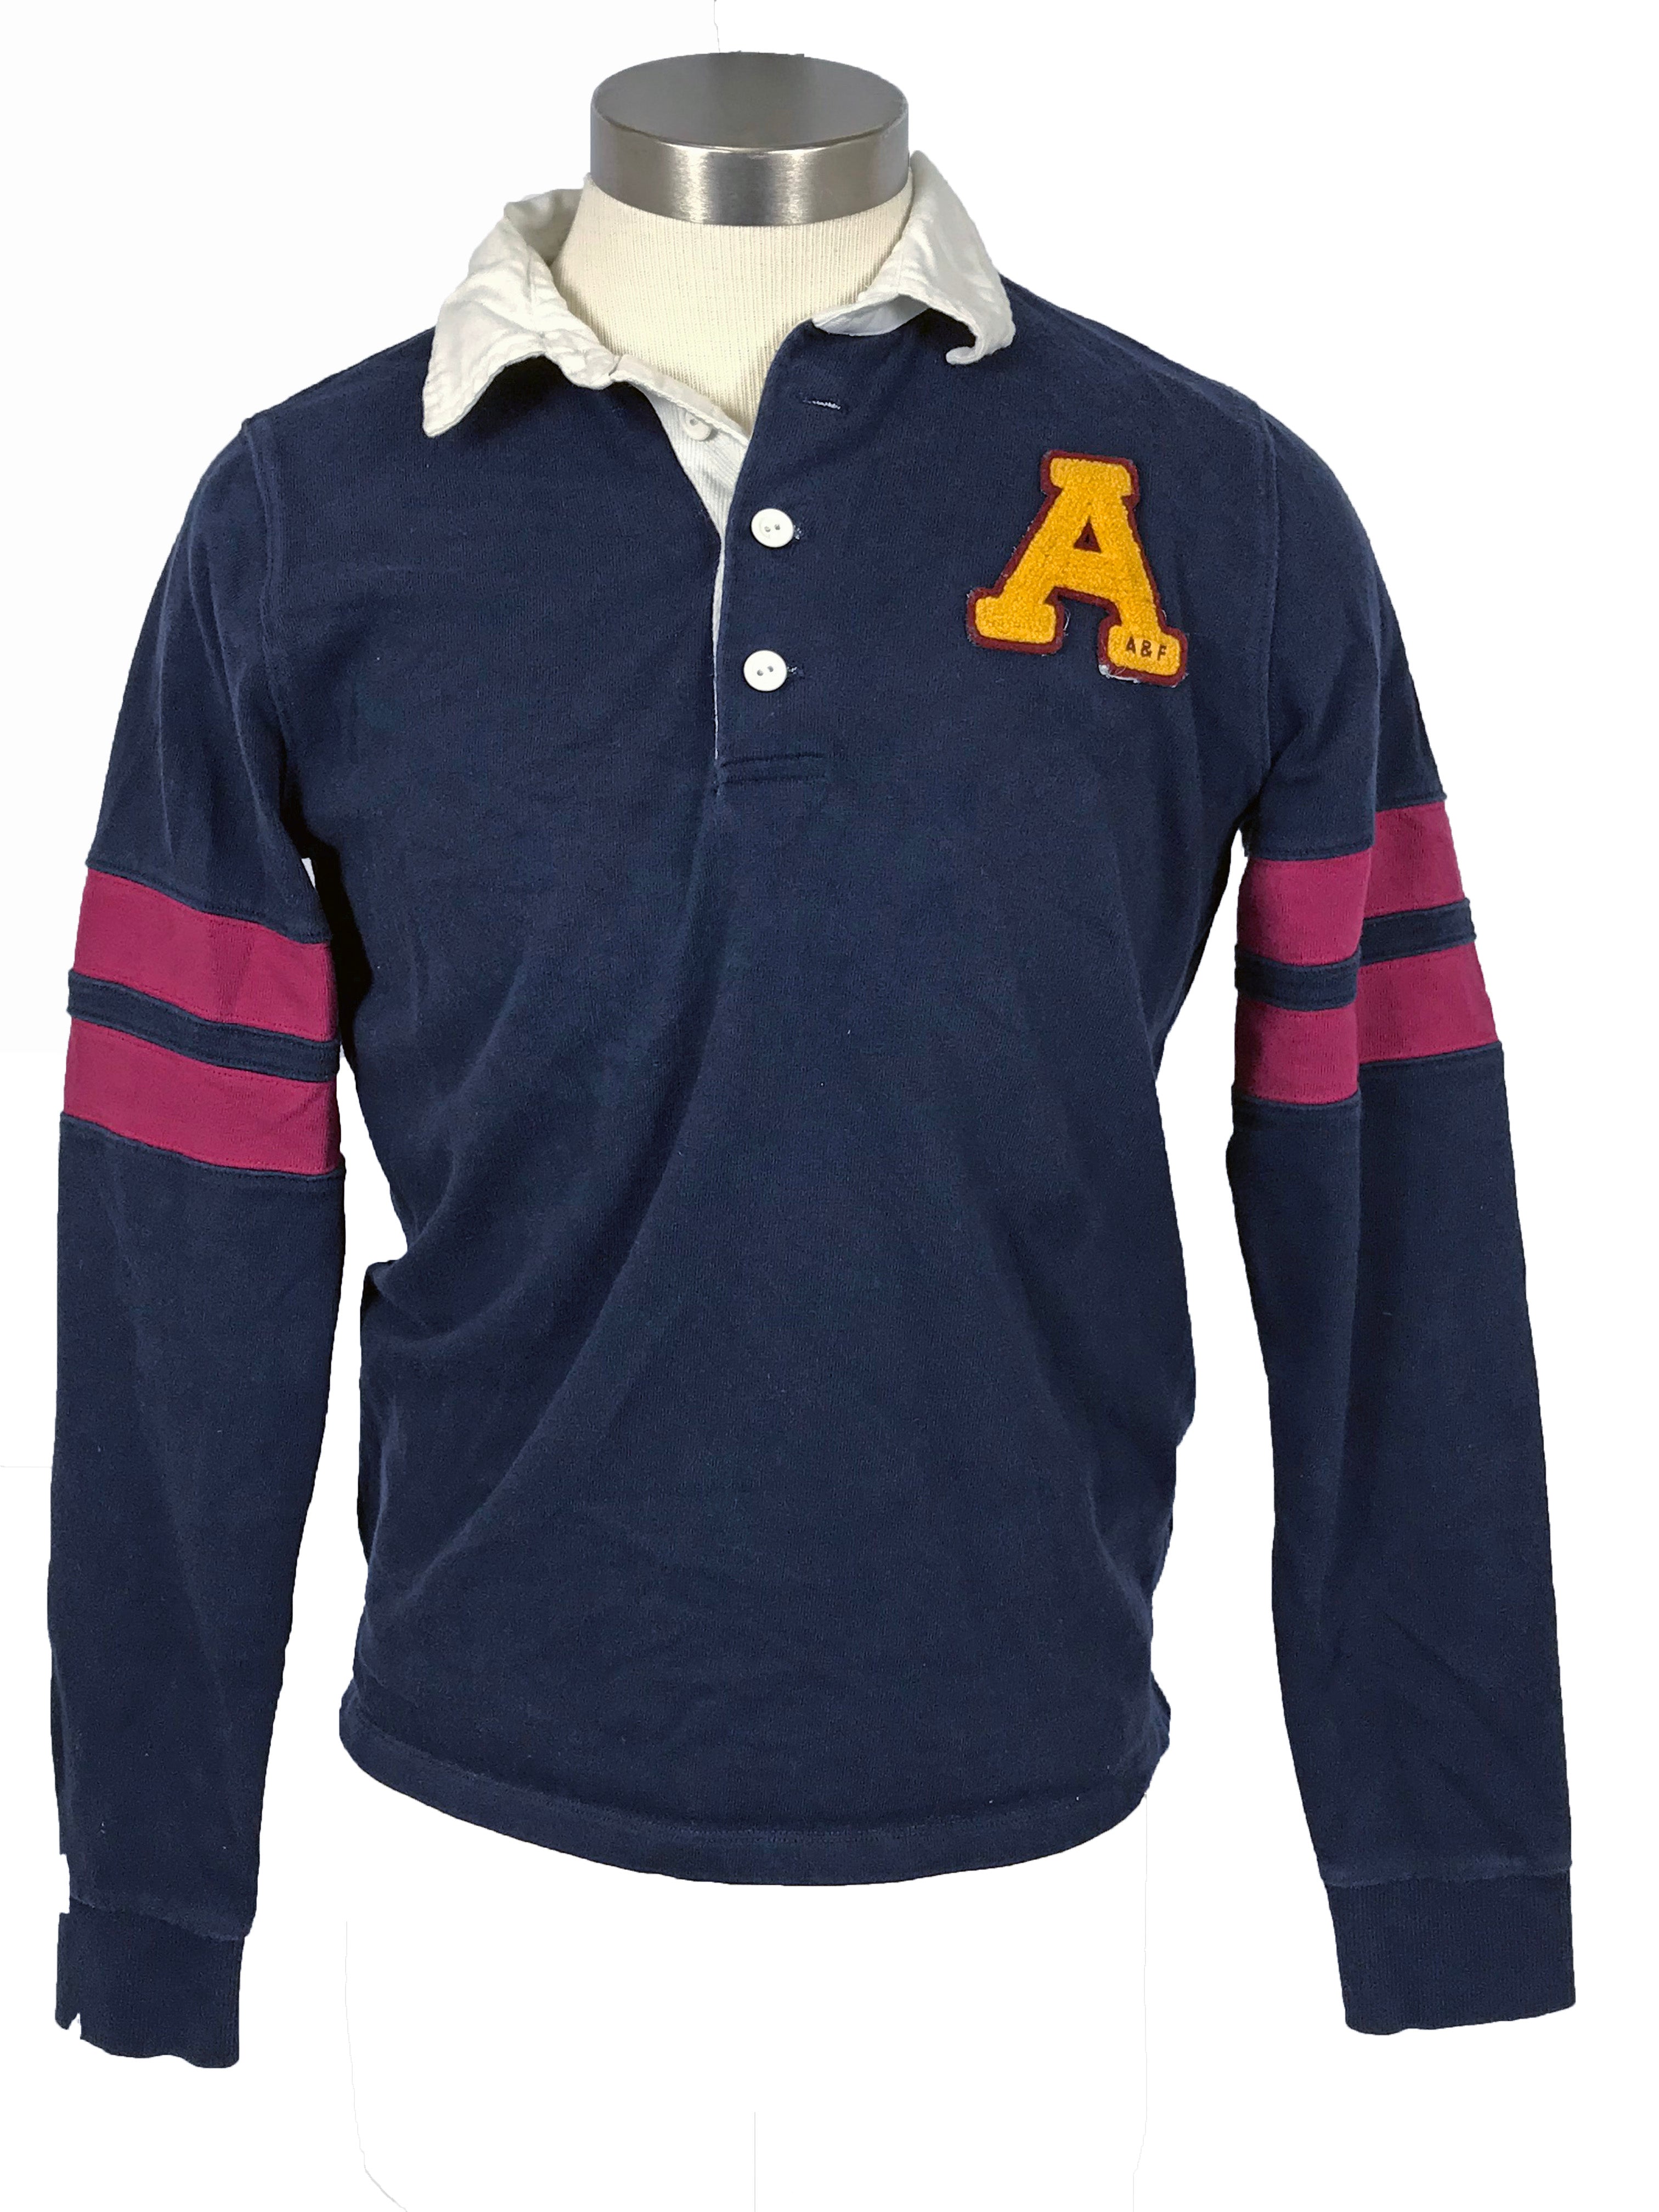 Abercrombie Rugby Cloth Navy Long Sleeve Polo Men's Size L